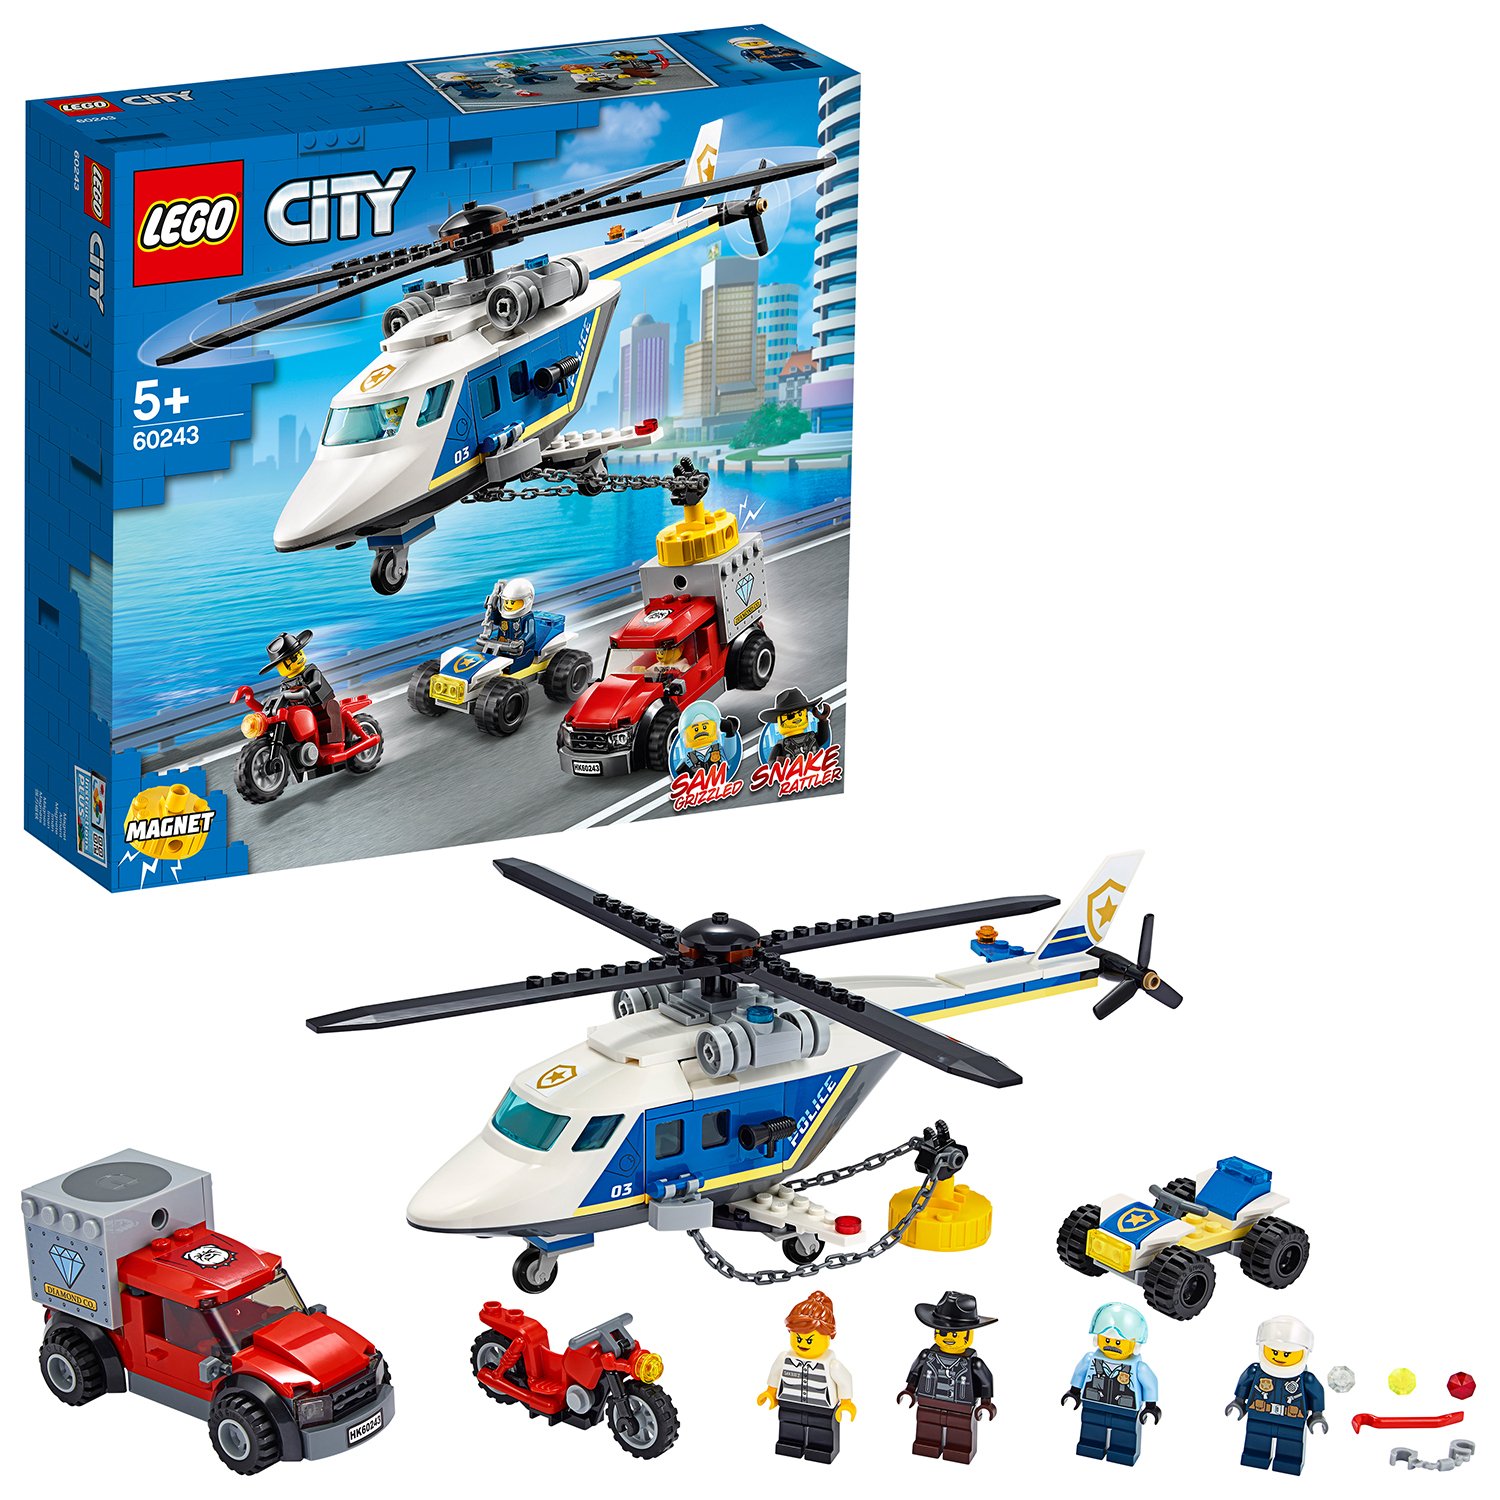 LEGO City Police Helicopter Chase Building Set Review